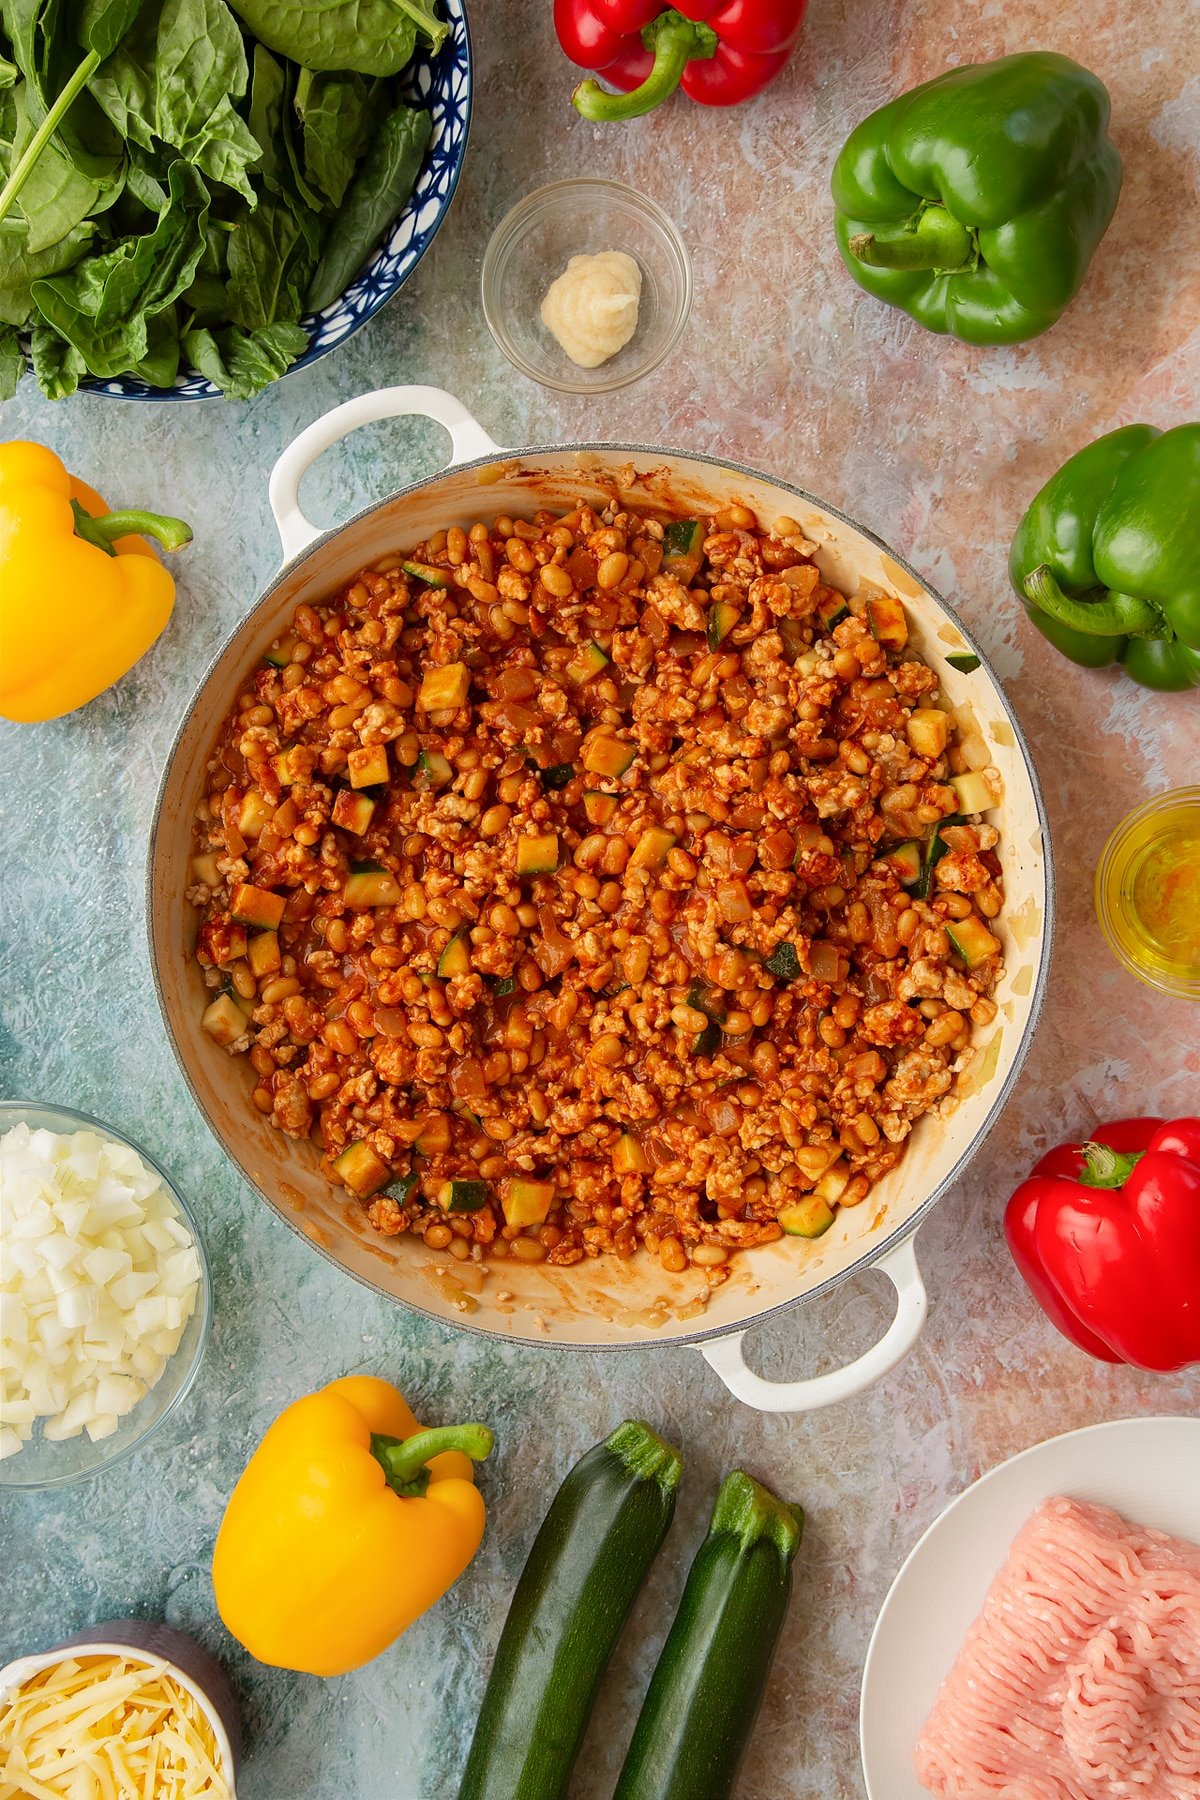 Onions, garlic, turkey mince, courgette, baked beans, turkey mince, tomato puree, cumin and smoked paprika in a large shallow pan. Ingredients to make baked bean stuffed peppers surround the pan.